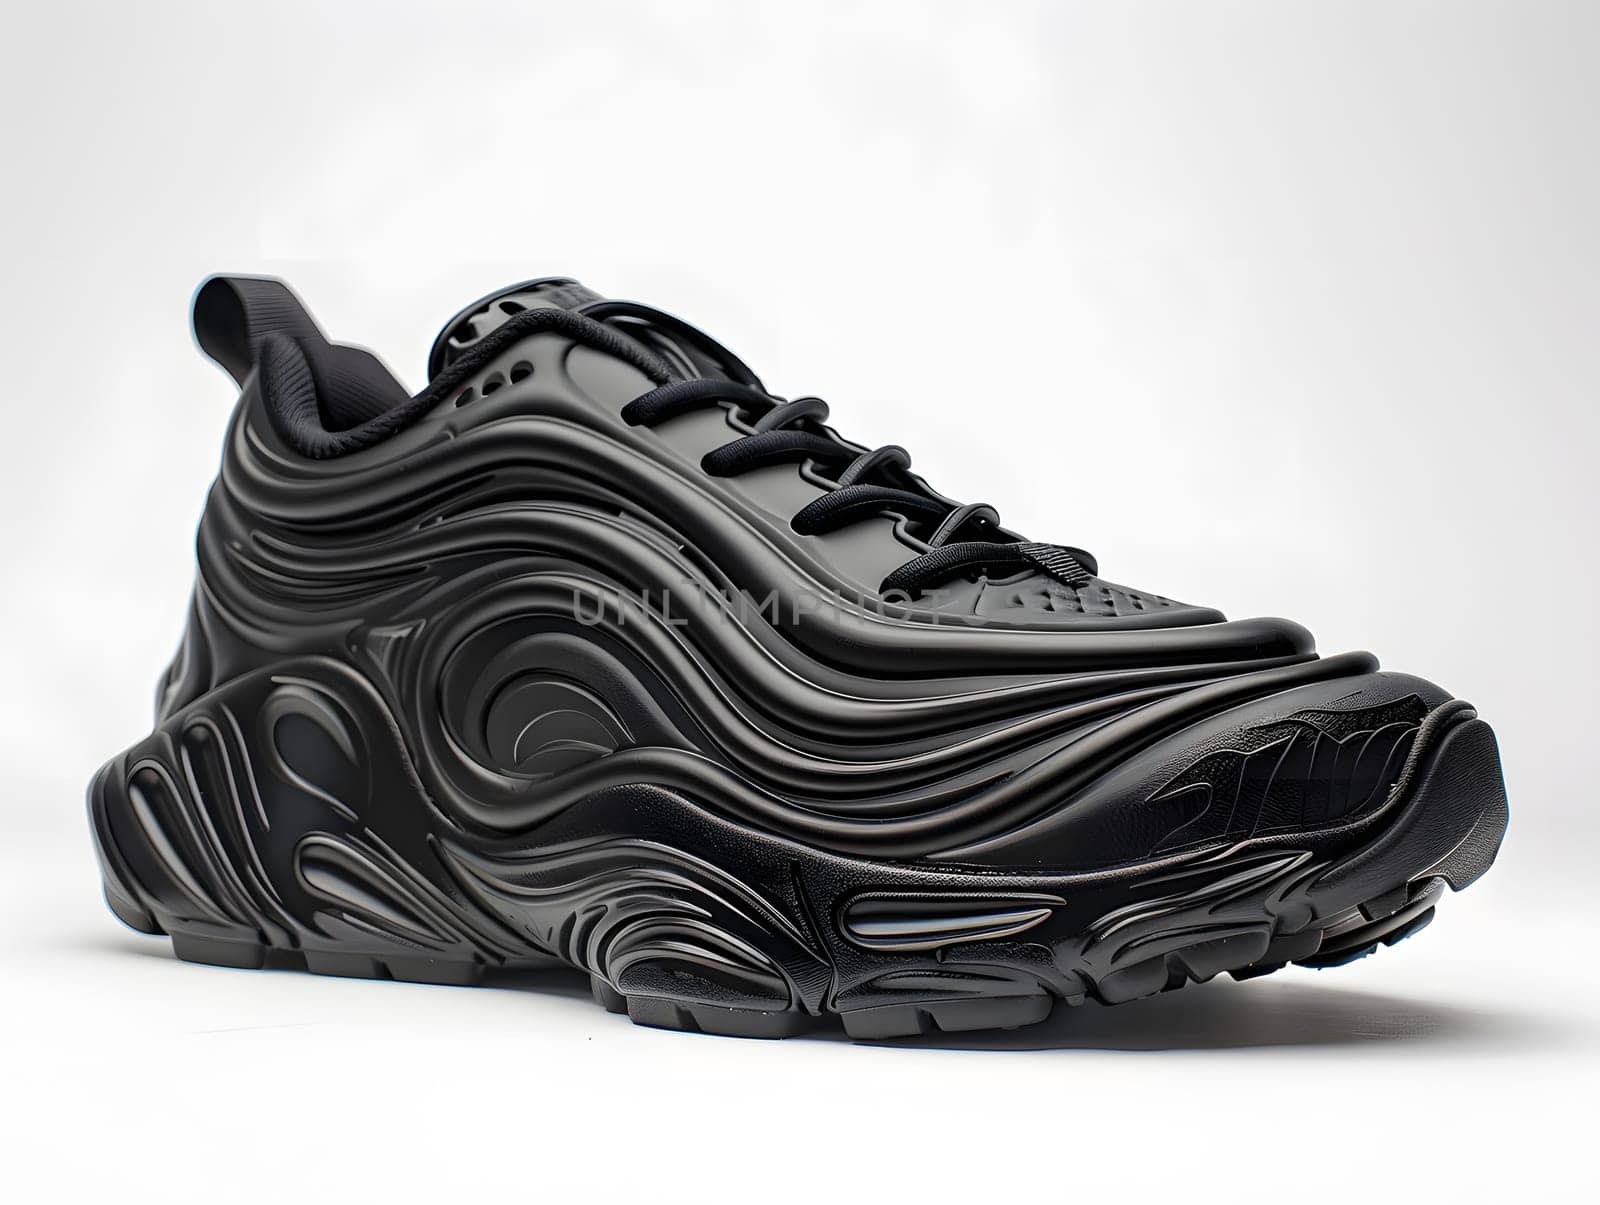 A closeup of a black athletic shoe on a white surface, showcasing the intricate pattern and detailing. The contrast between the shoe and background creates a striking still life photography image